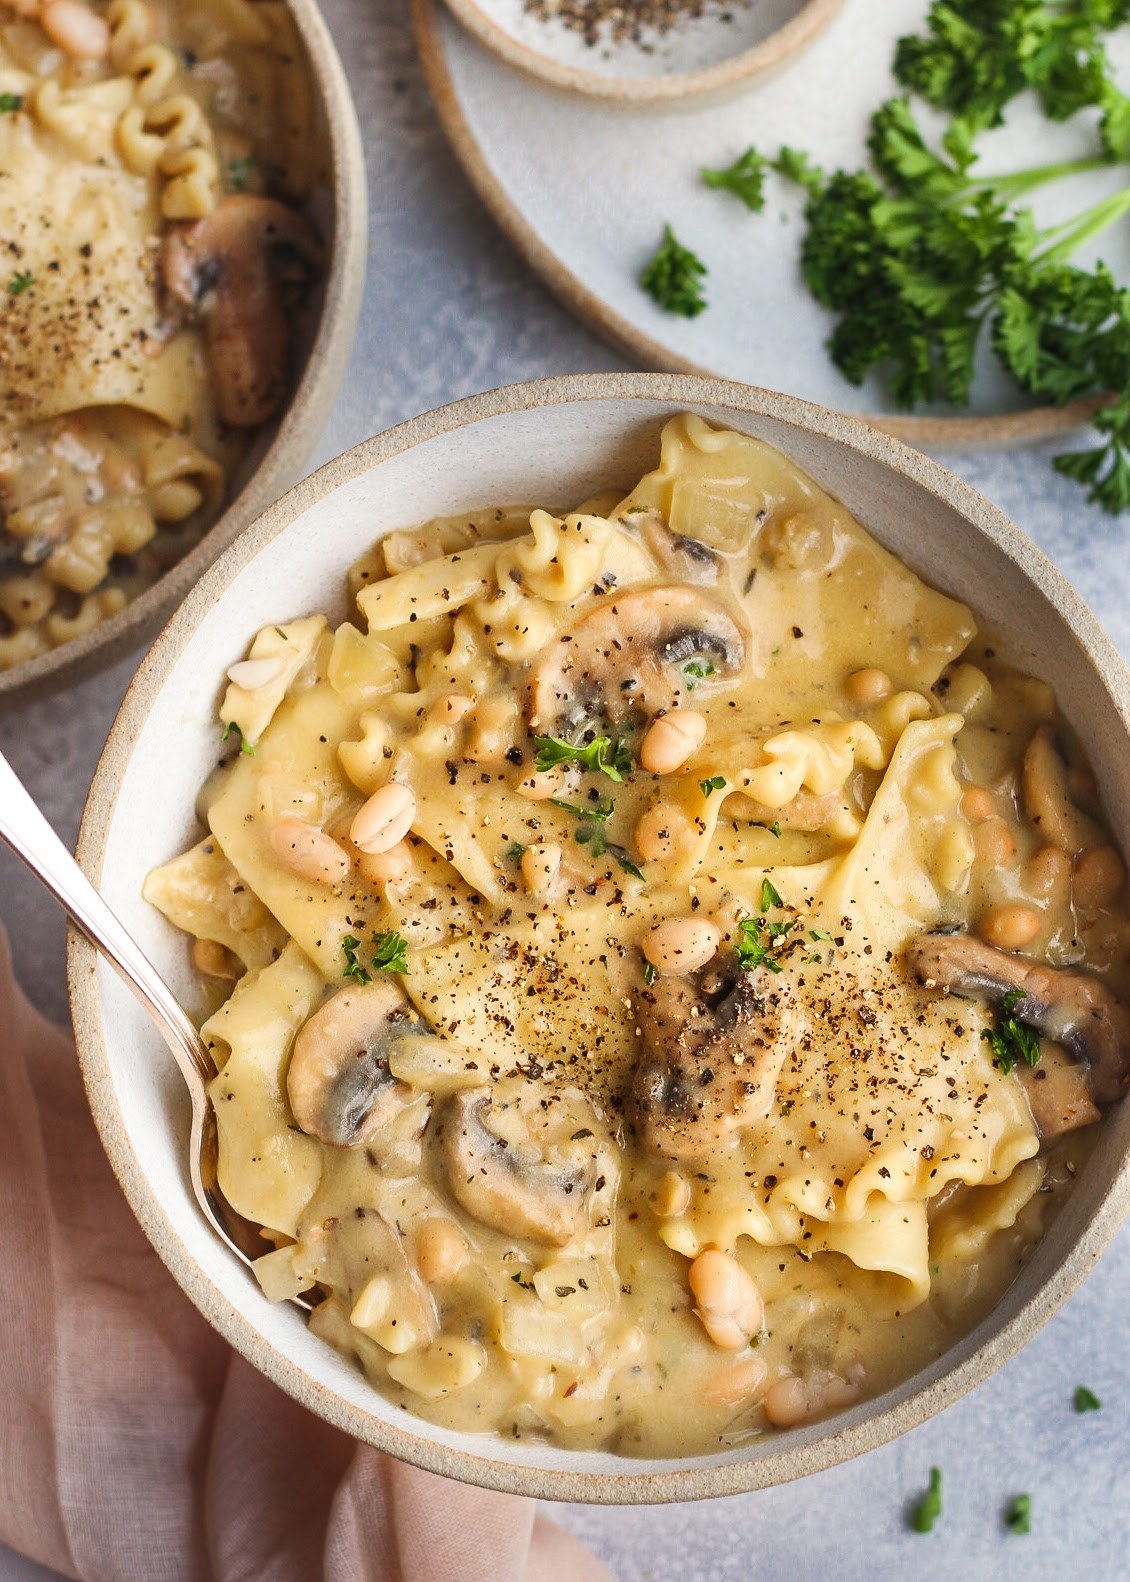 Creamy pasta with mushrooms and white beans.